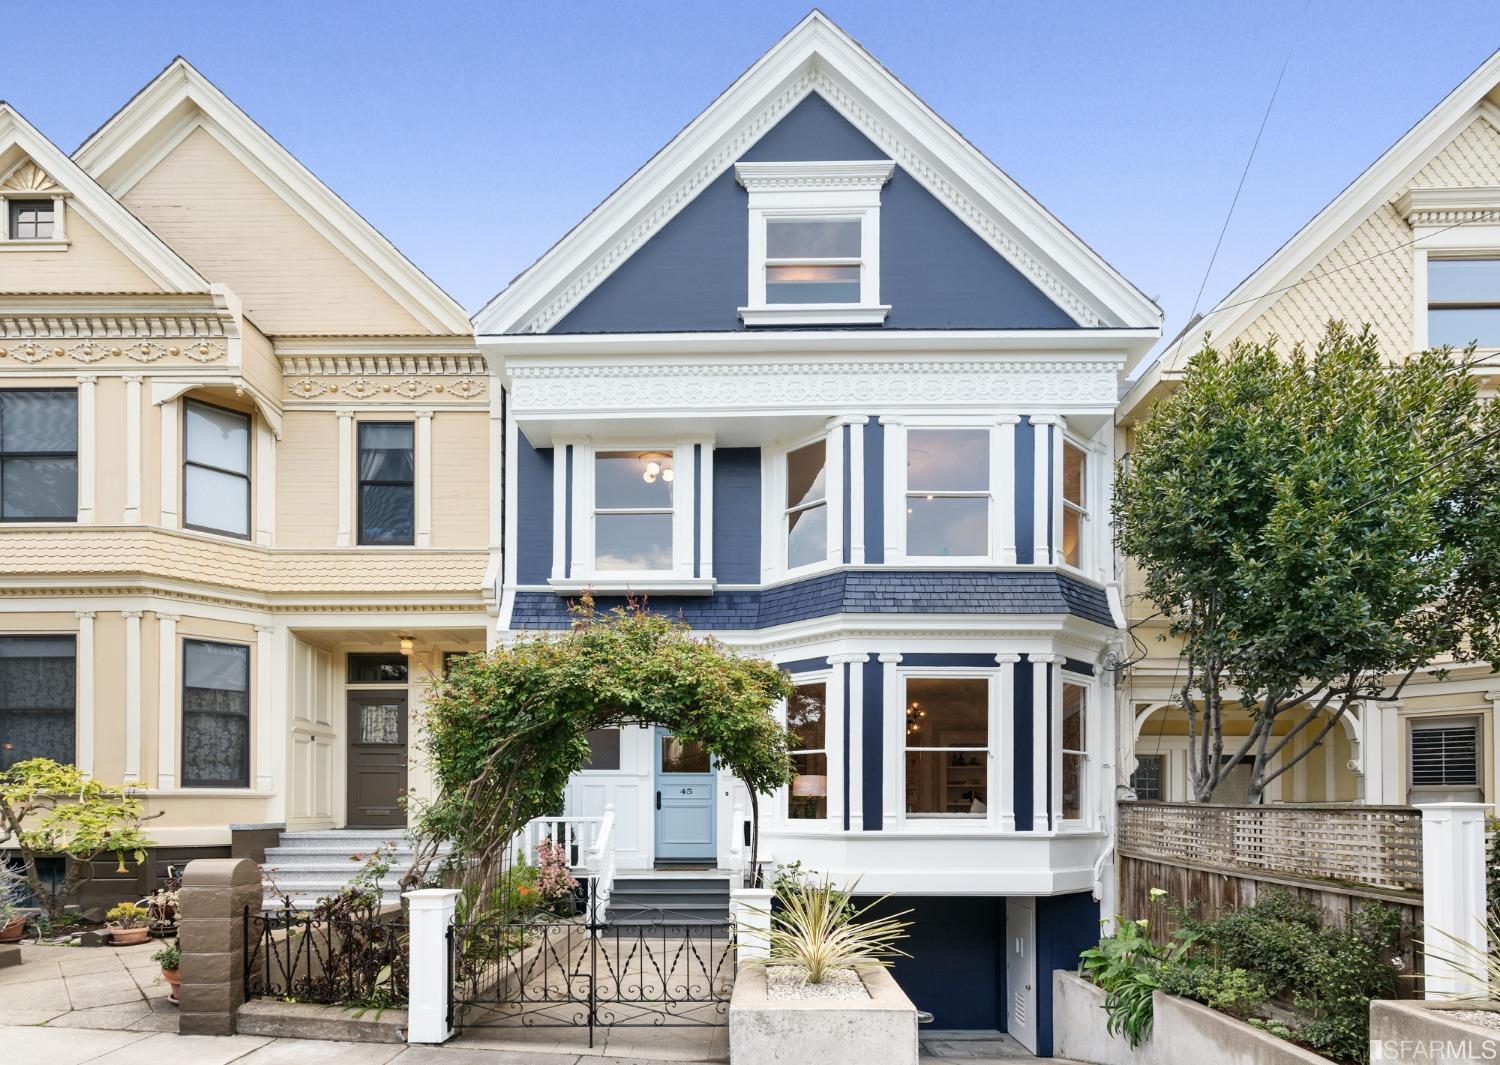 Feature photo for 45 Hartford Street, San Francisco